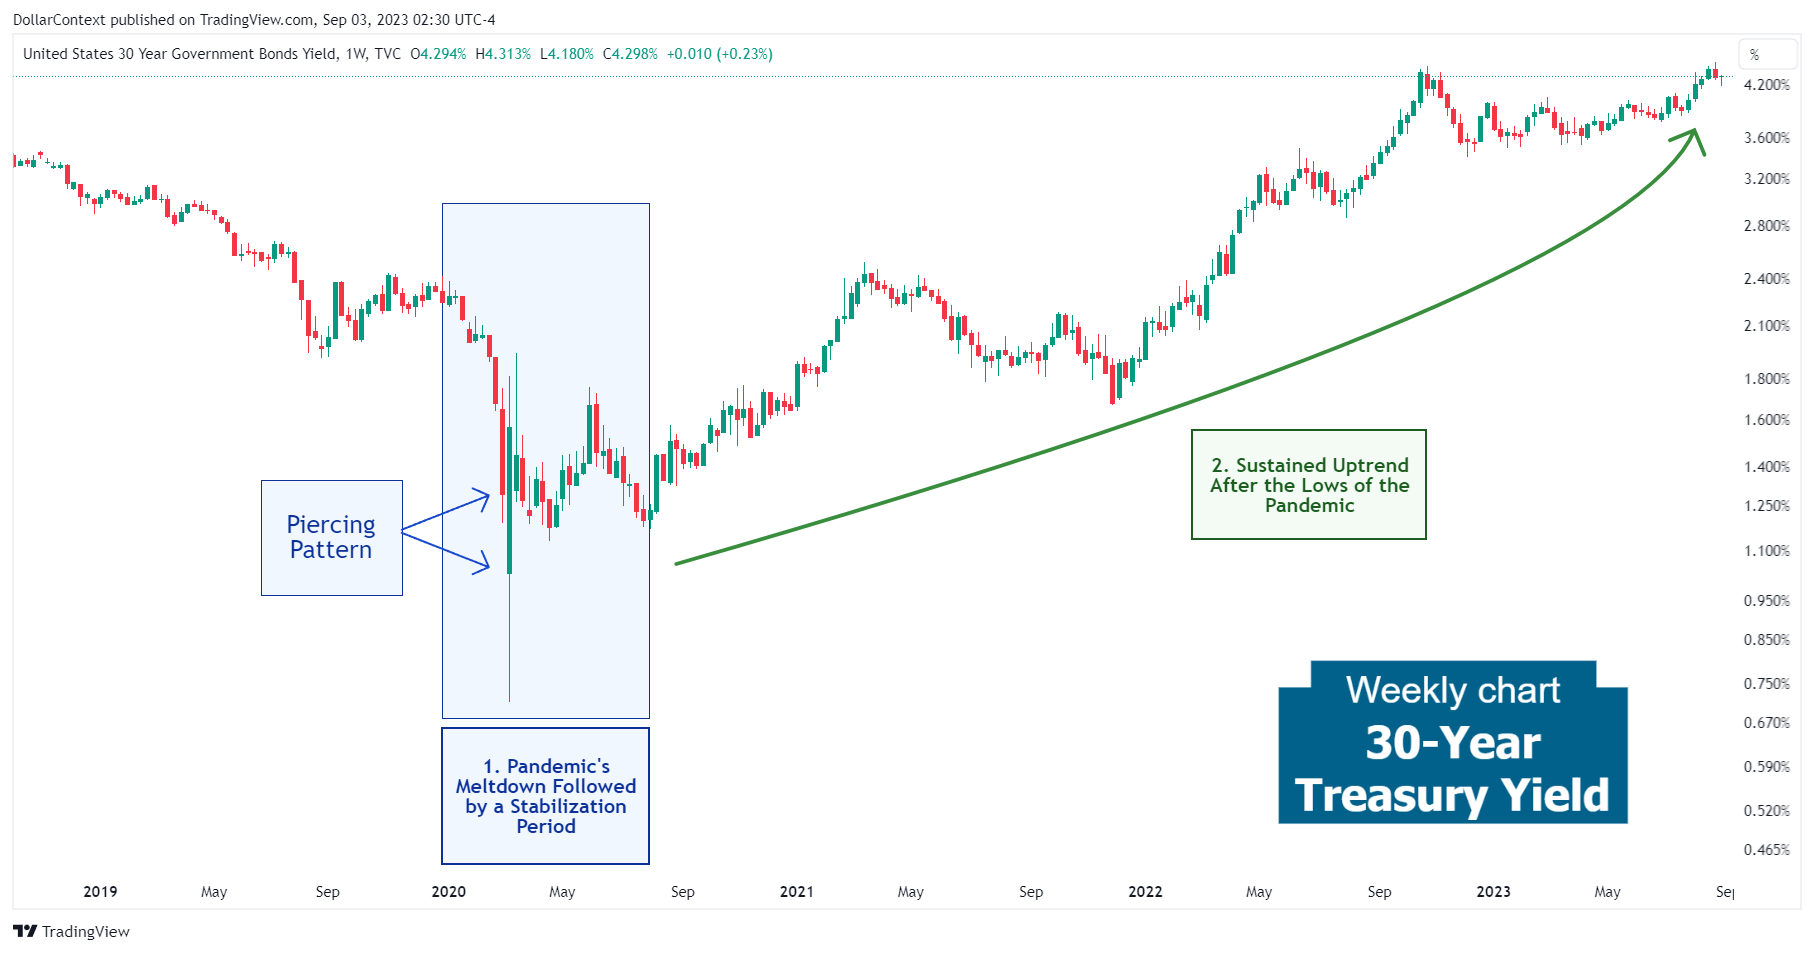 30-Year Treasury Yield: The Prolonged Rise from August 2020 to August 2023 (Weekly Chart)